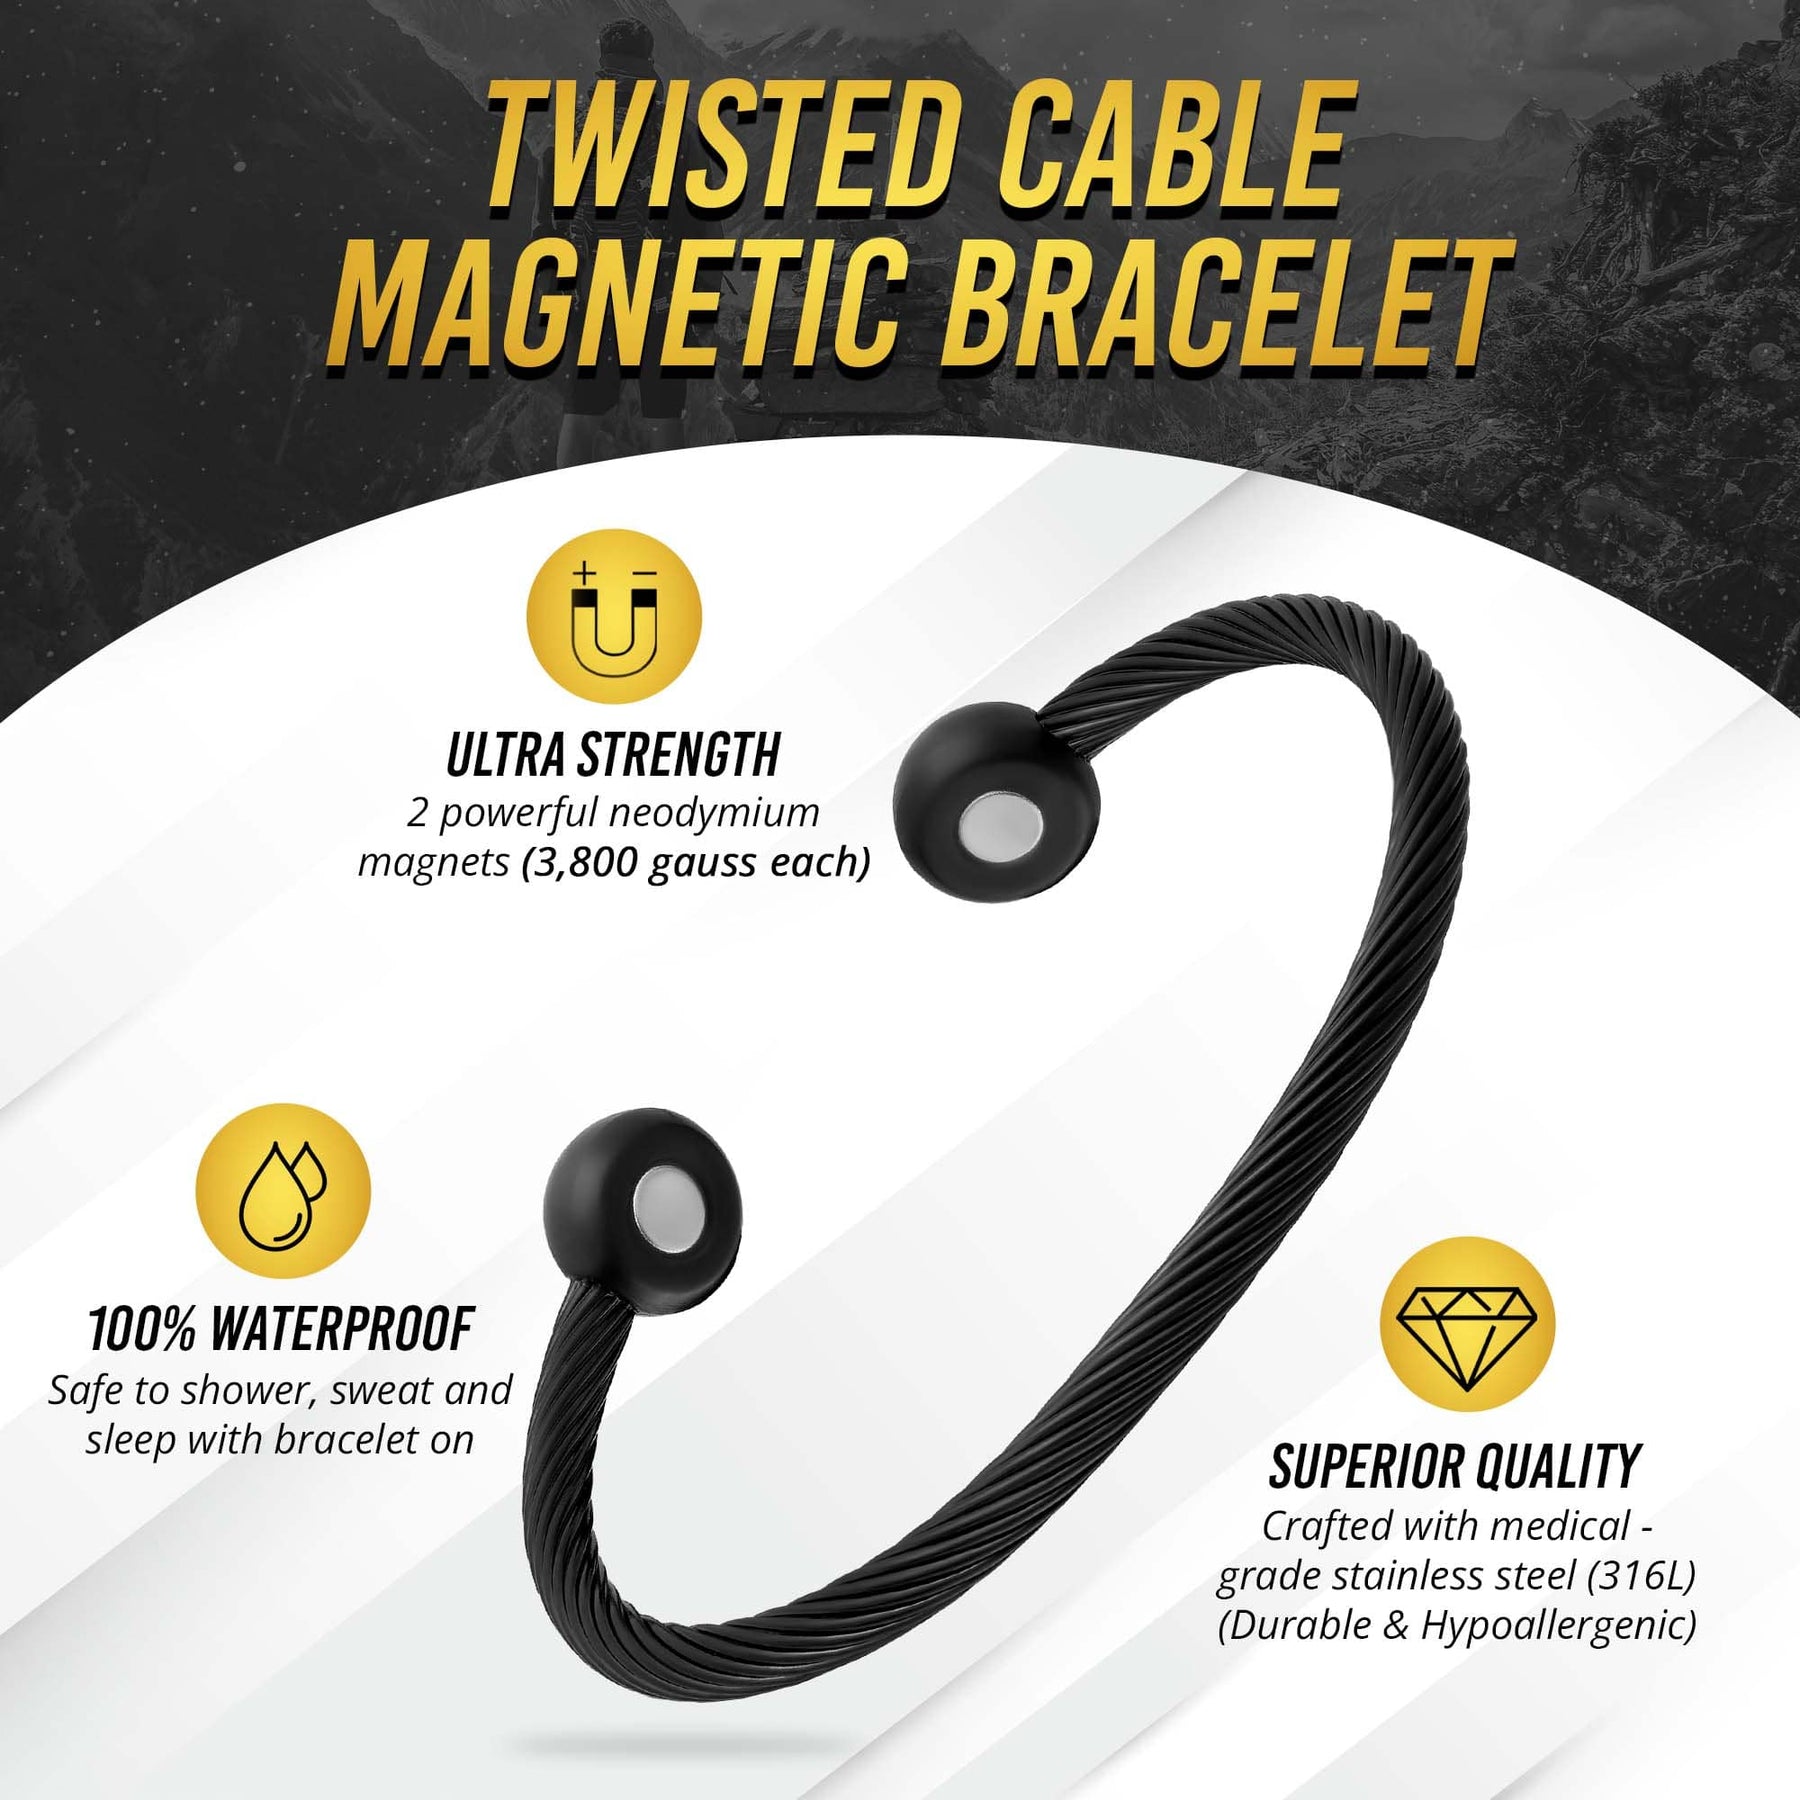 Twisted Cable Magnetic Bracelet Cuff (Black)